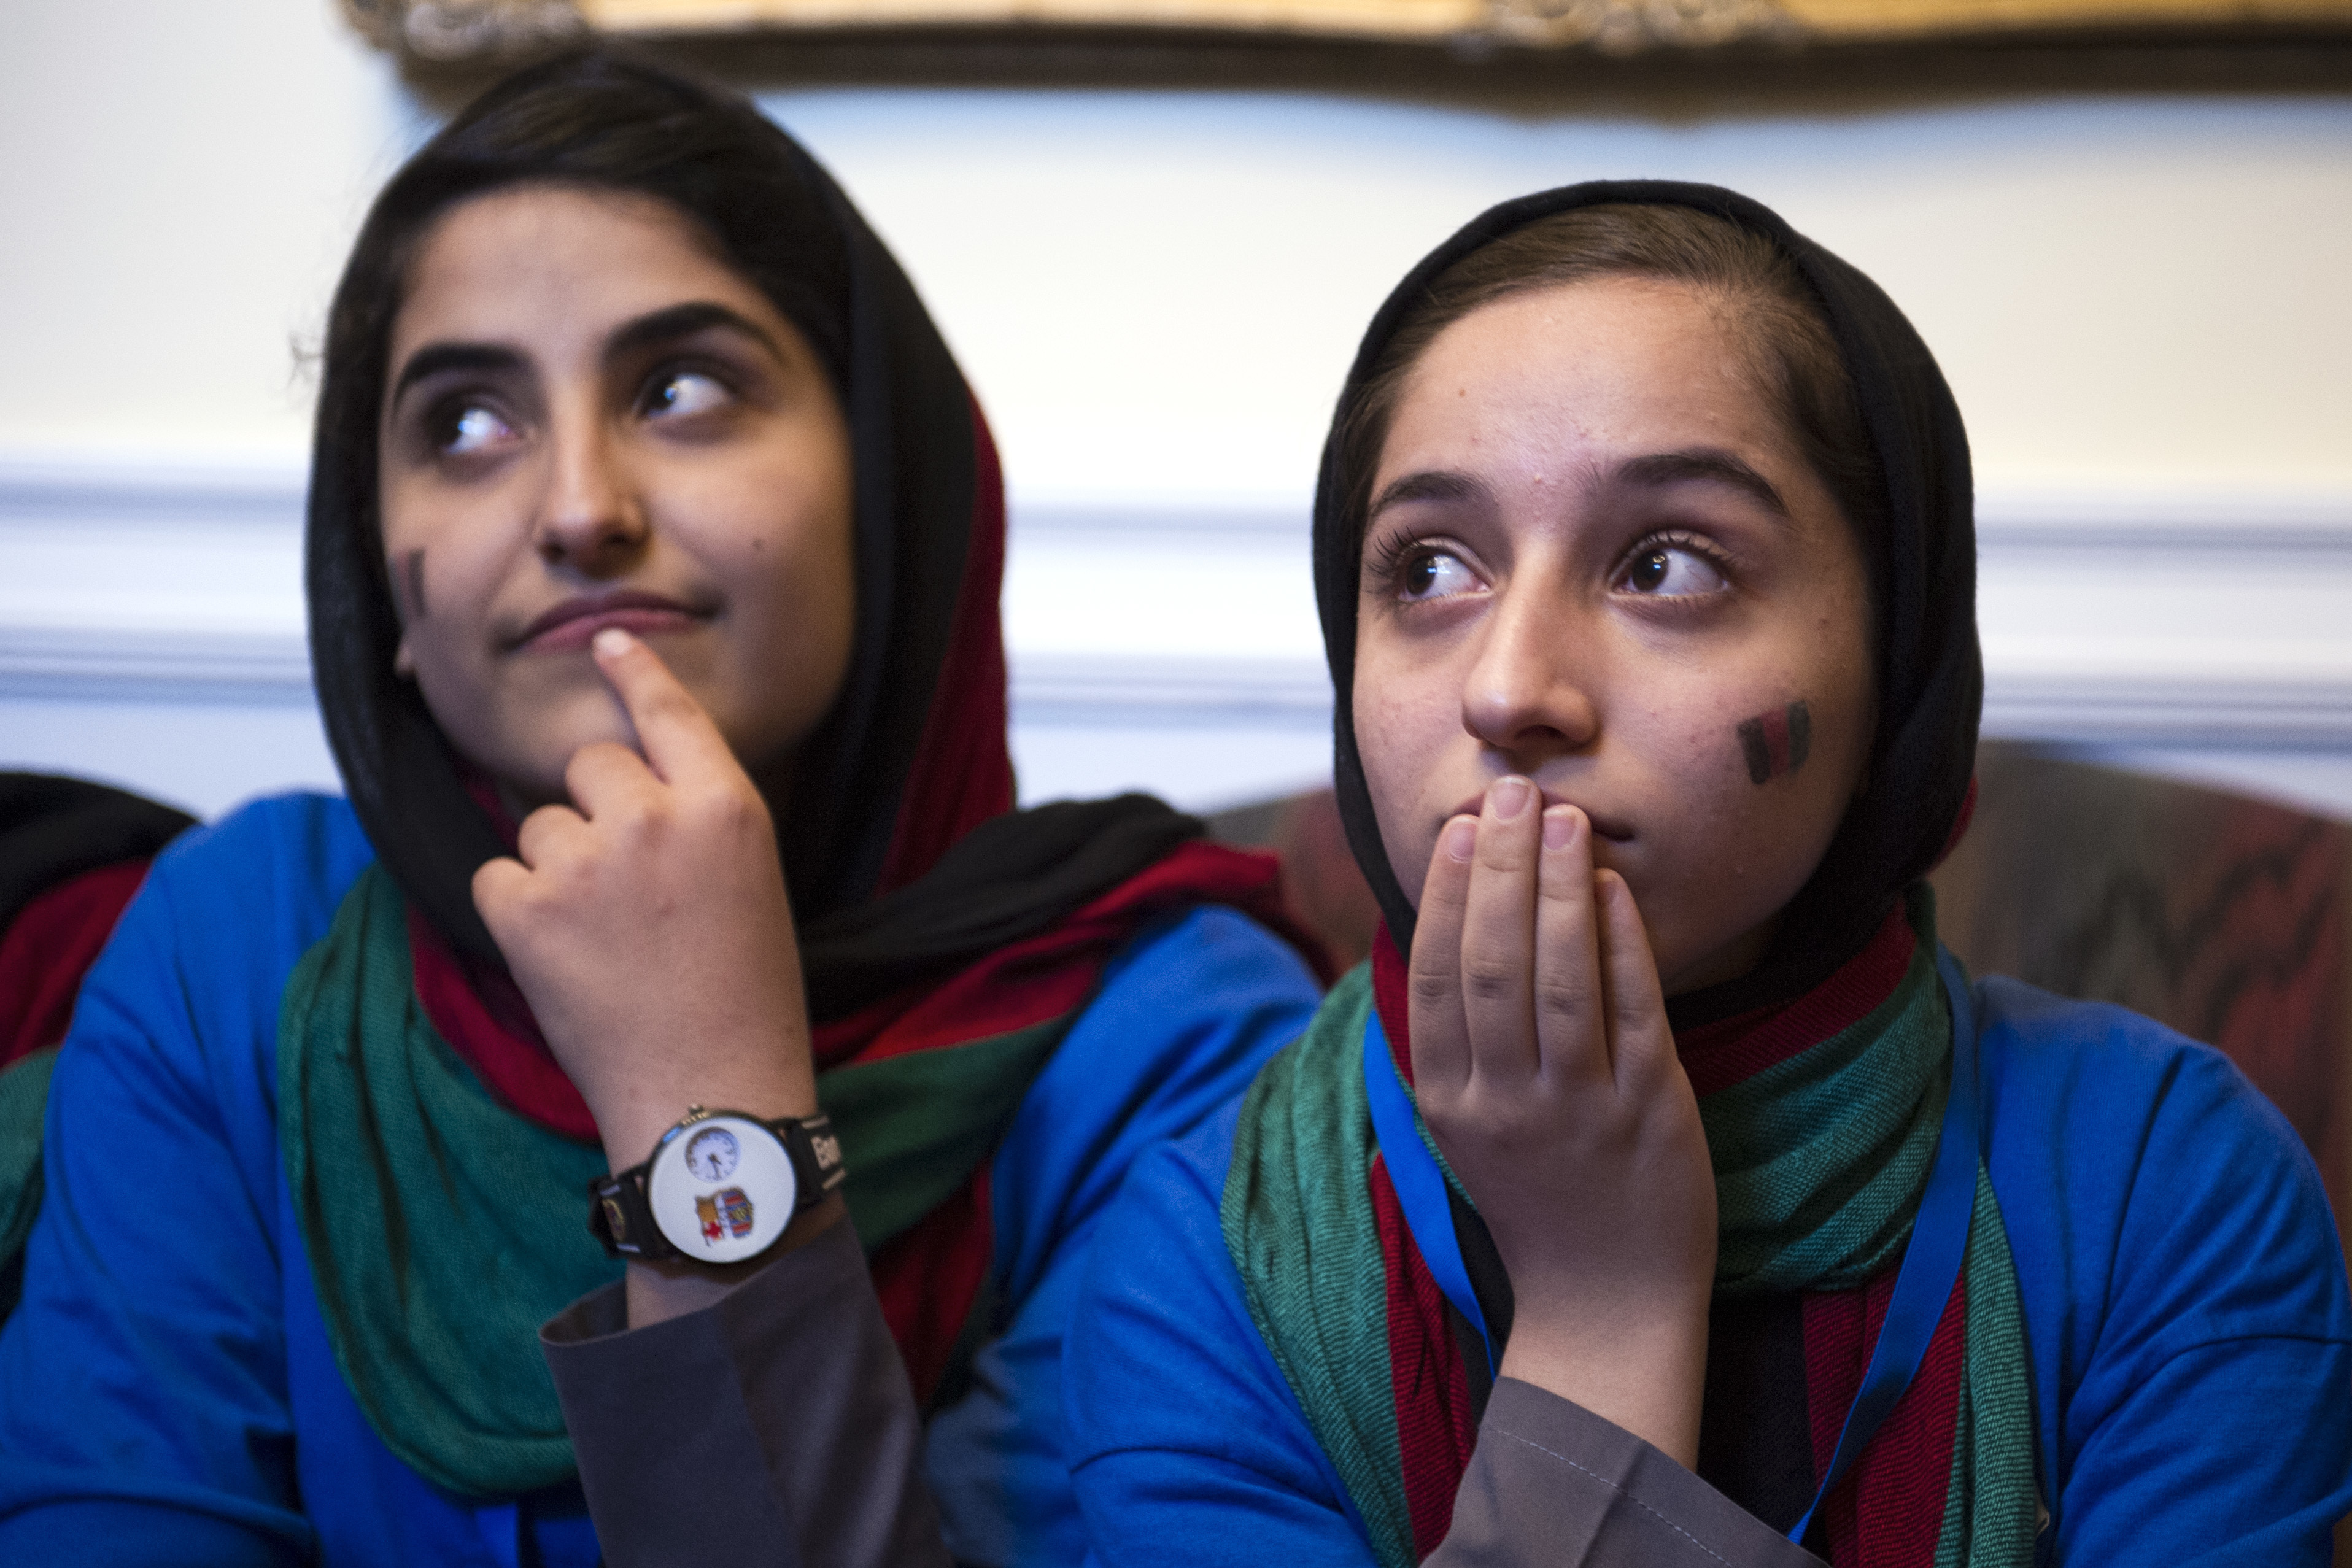 Afghanistan's FIRST Global Challenge team member Lida Azizi, left, and Fatemah Qaderyan meet with reporters following the opening ceremony in Washington, Sunday, July 16, 2017. Twice rejected for U.S. visas, the all-girls robotics team arrived in Washington on Saturday and will compete against entrants from more than 150 countries in the three-day high school competition. It's the first annual robotics competition designed to encourage youths to pursue careers in math and science. (AP Photo/Cliff Owen)